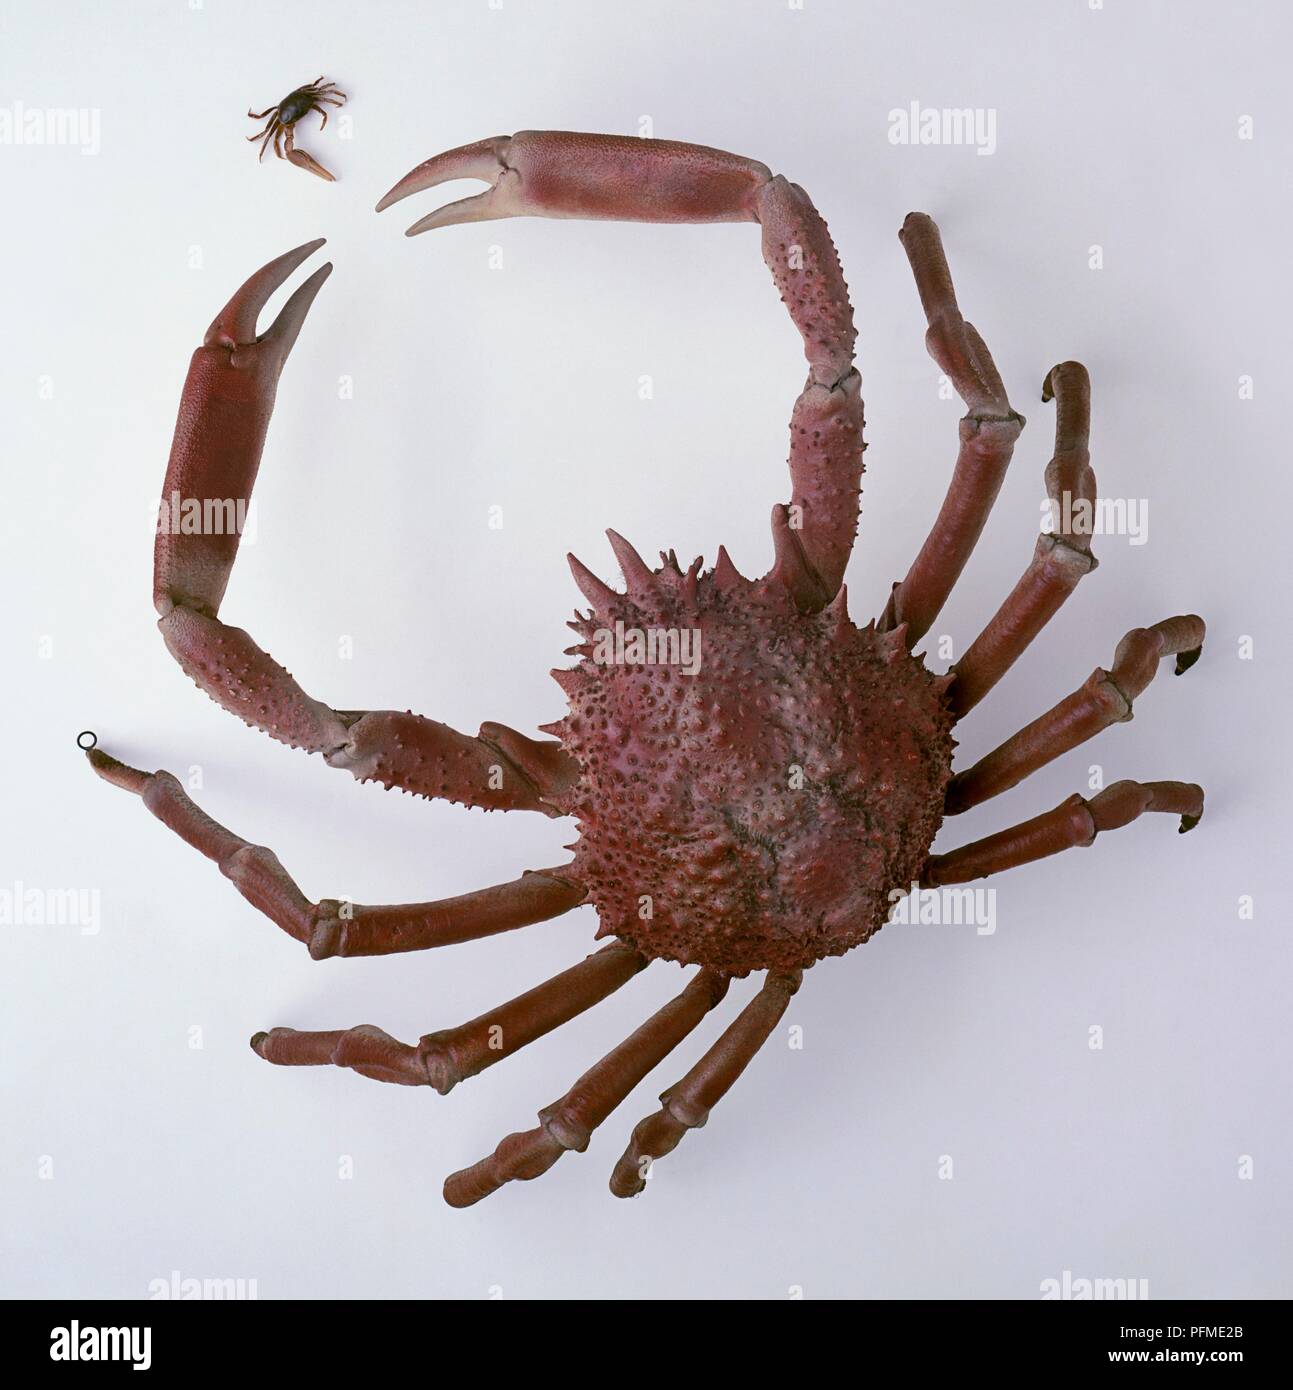 Spiny spider crab (Maja squinado) and smaller Fiddler crab (Uca sp.), view from above Stock Photo